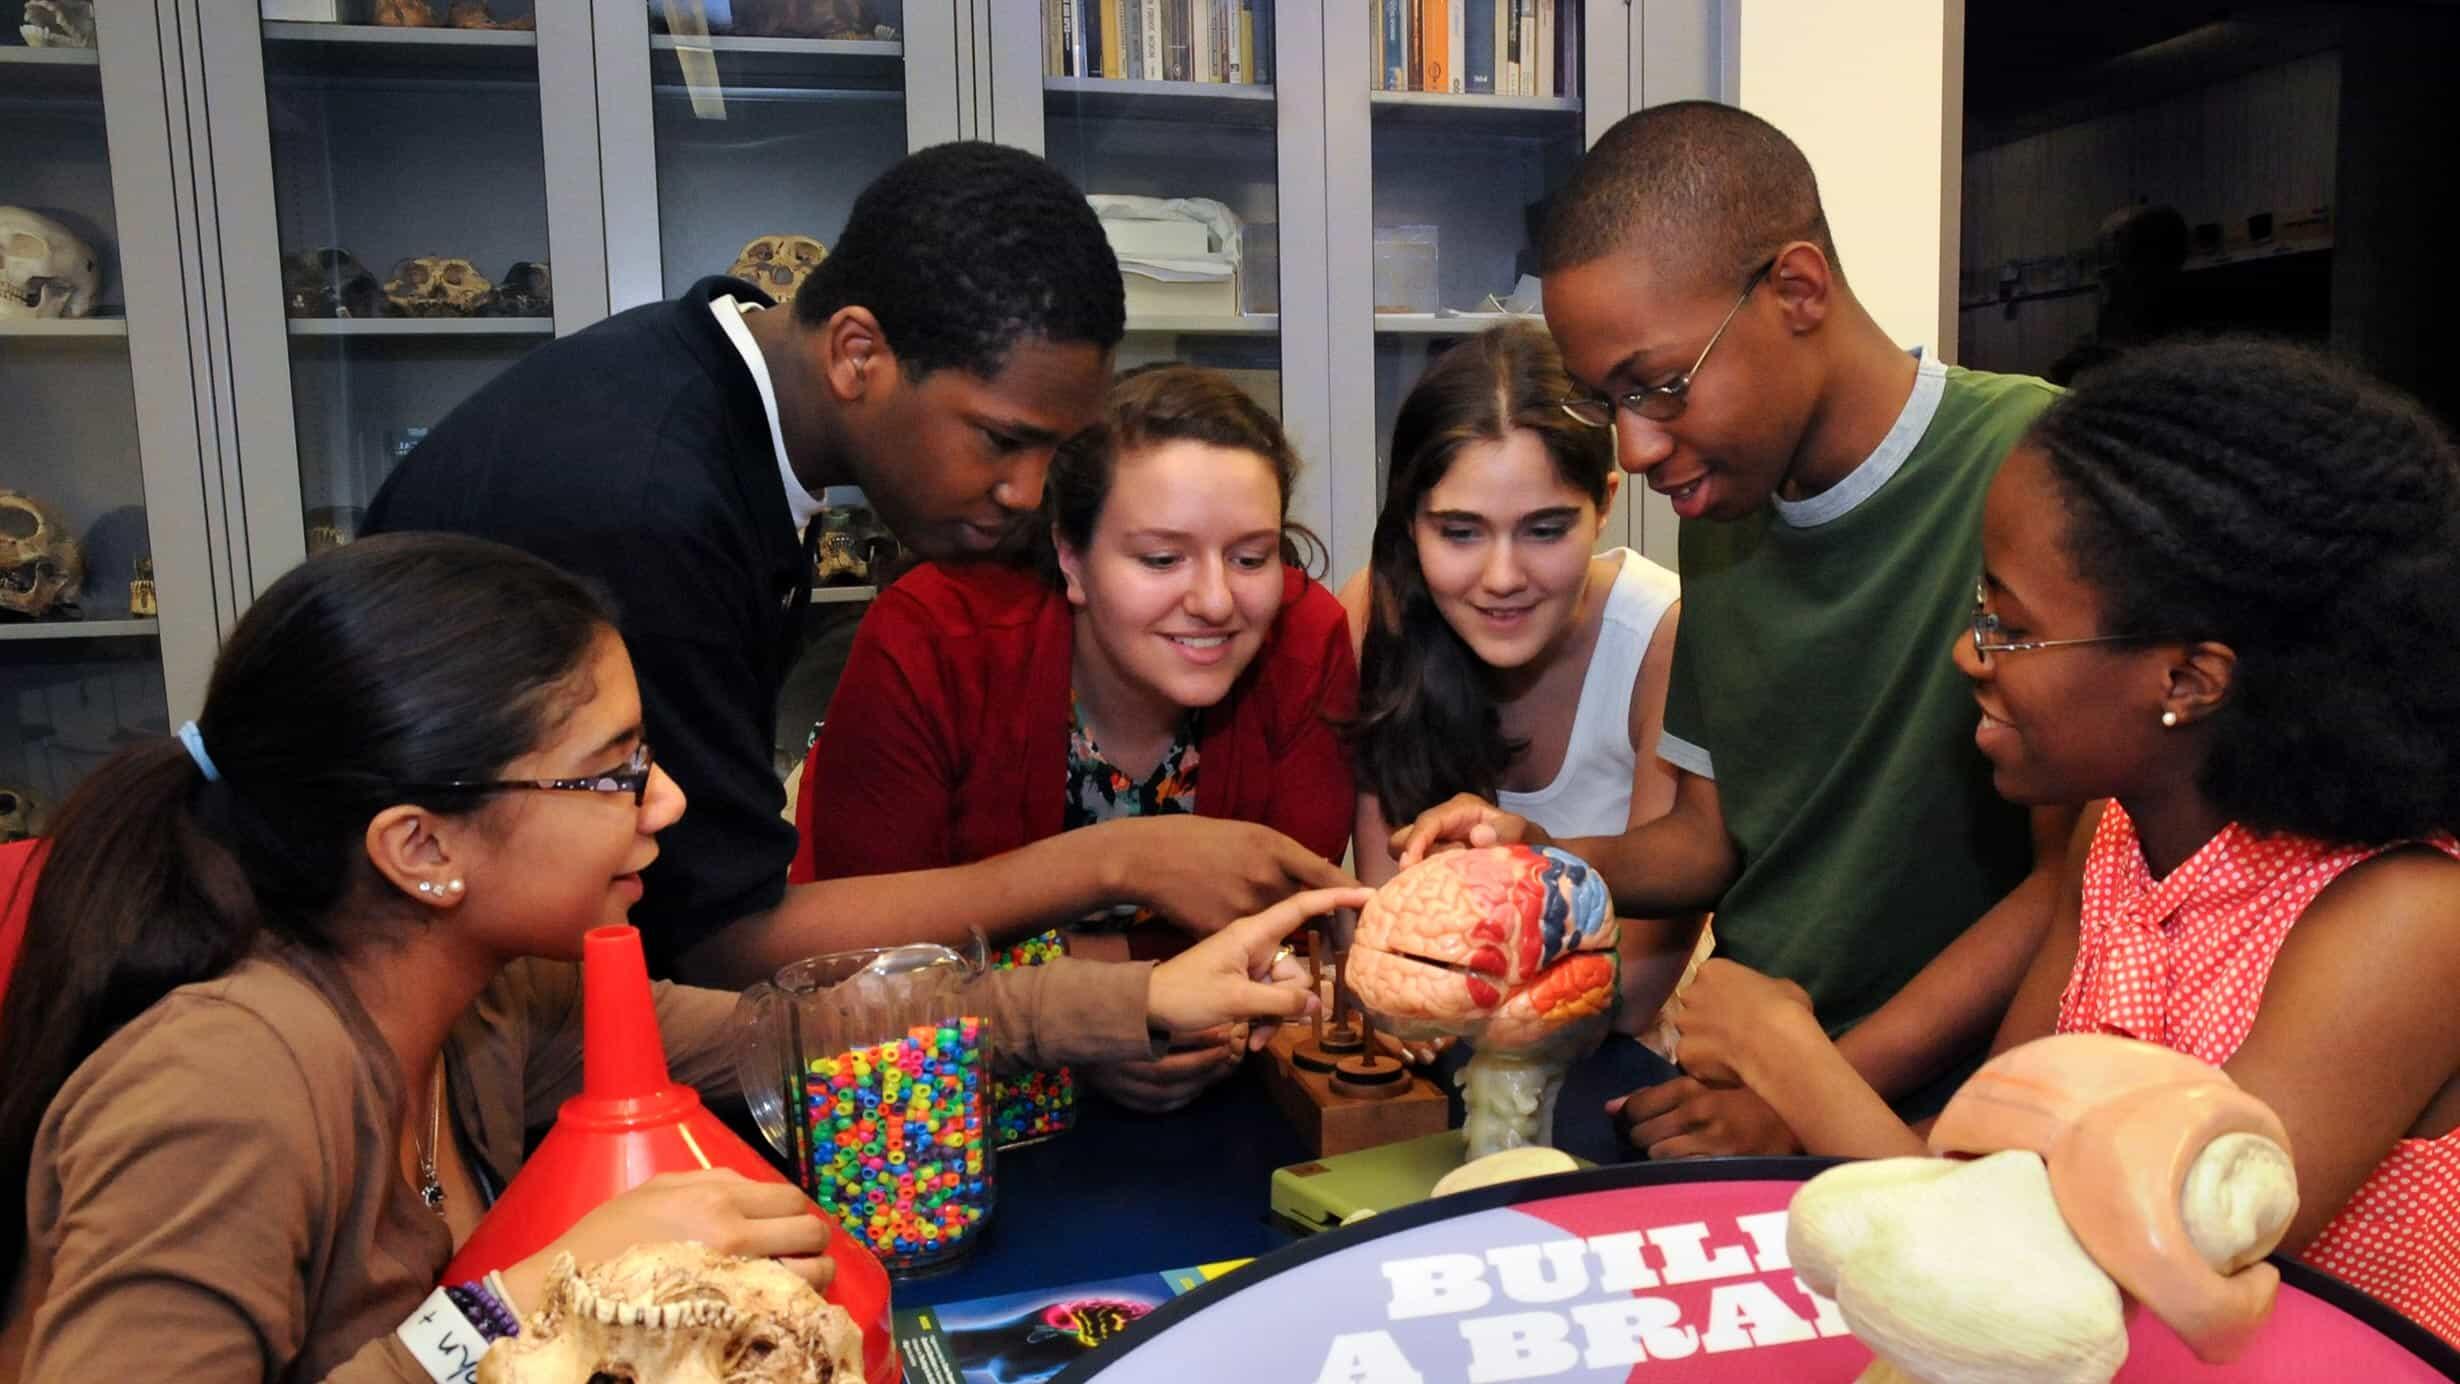 Teenagers examining an anatomical model of the human brain together.